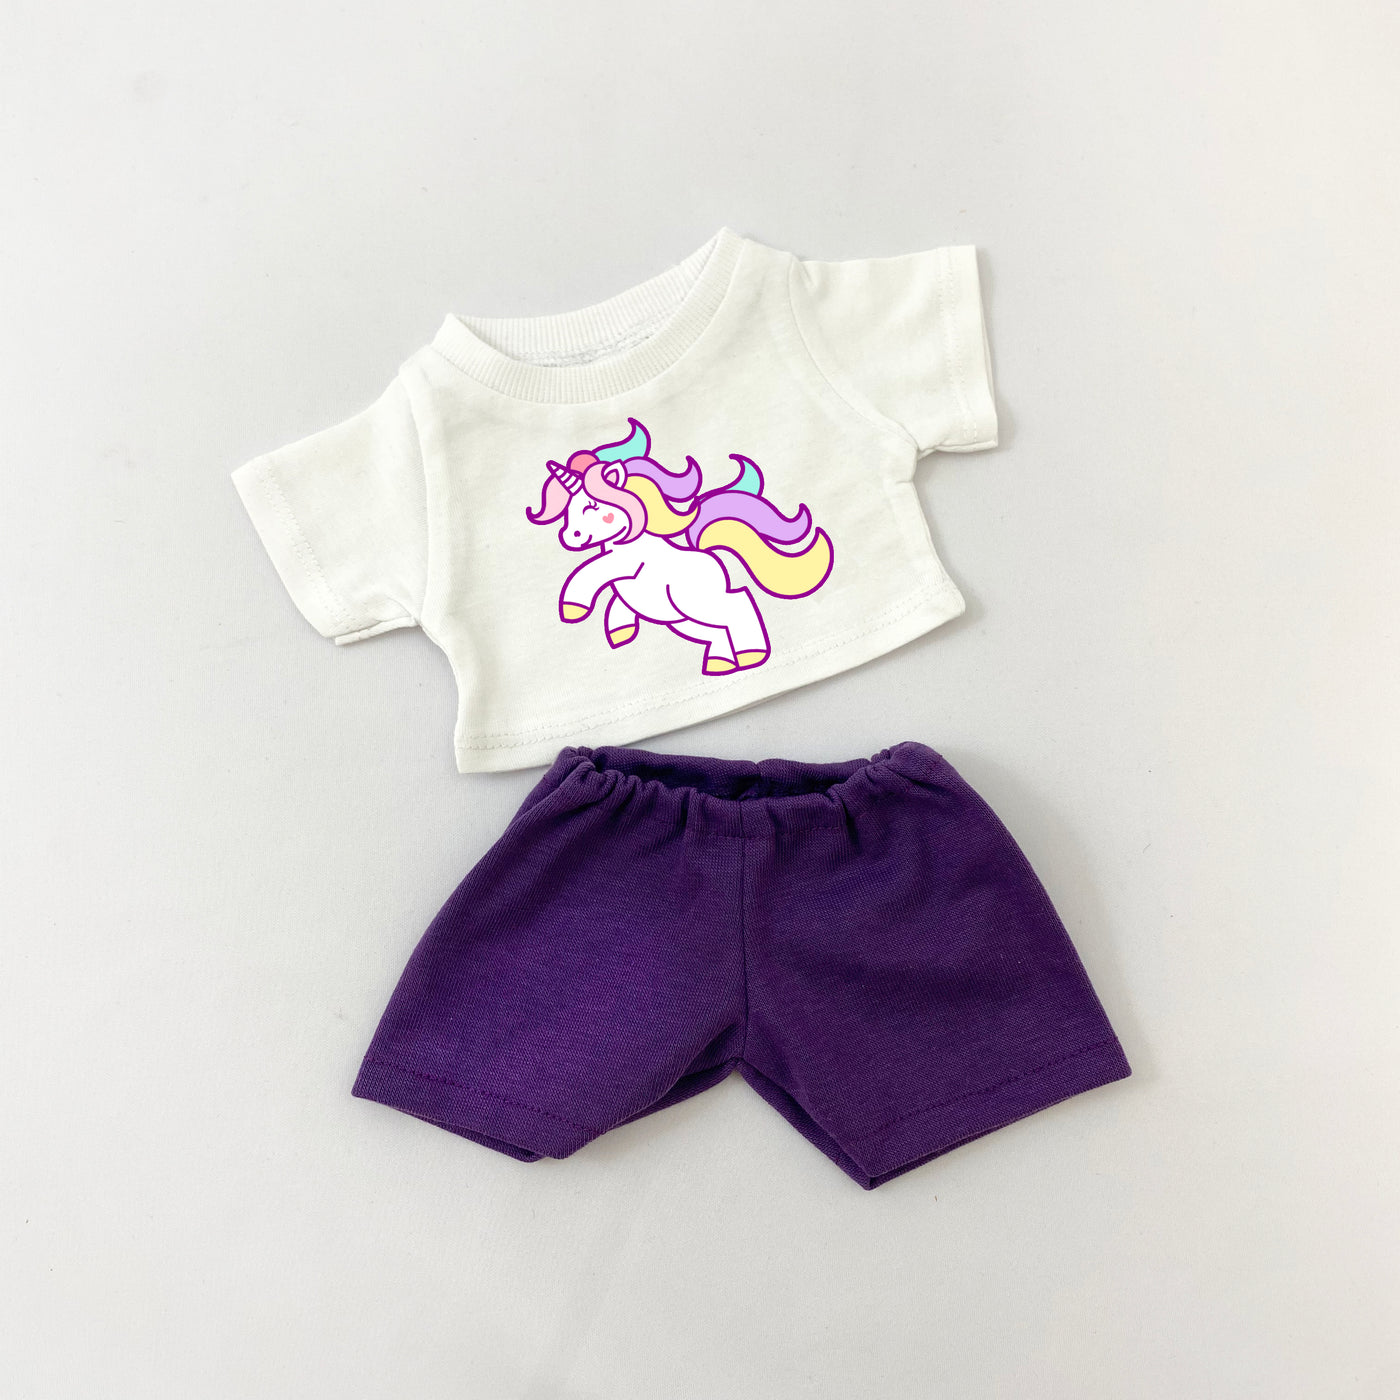 Rag Doll Outfit - Unicorn